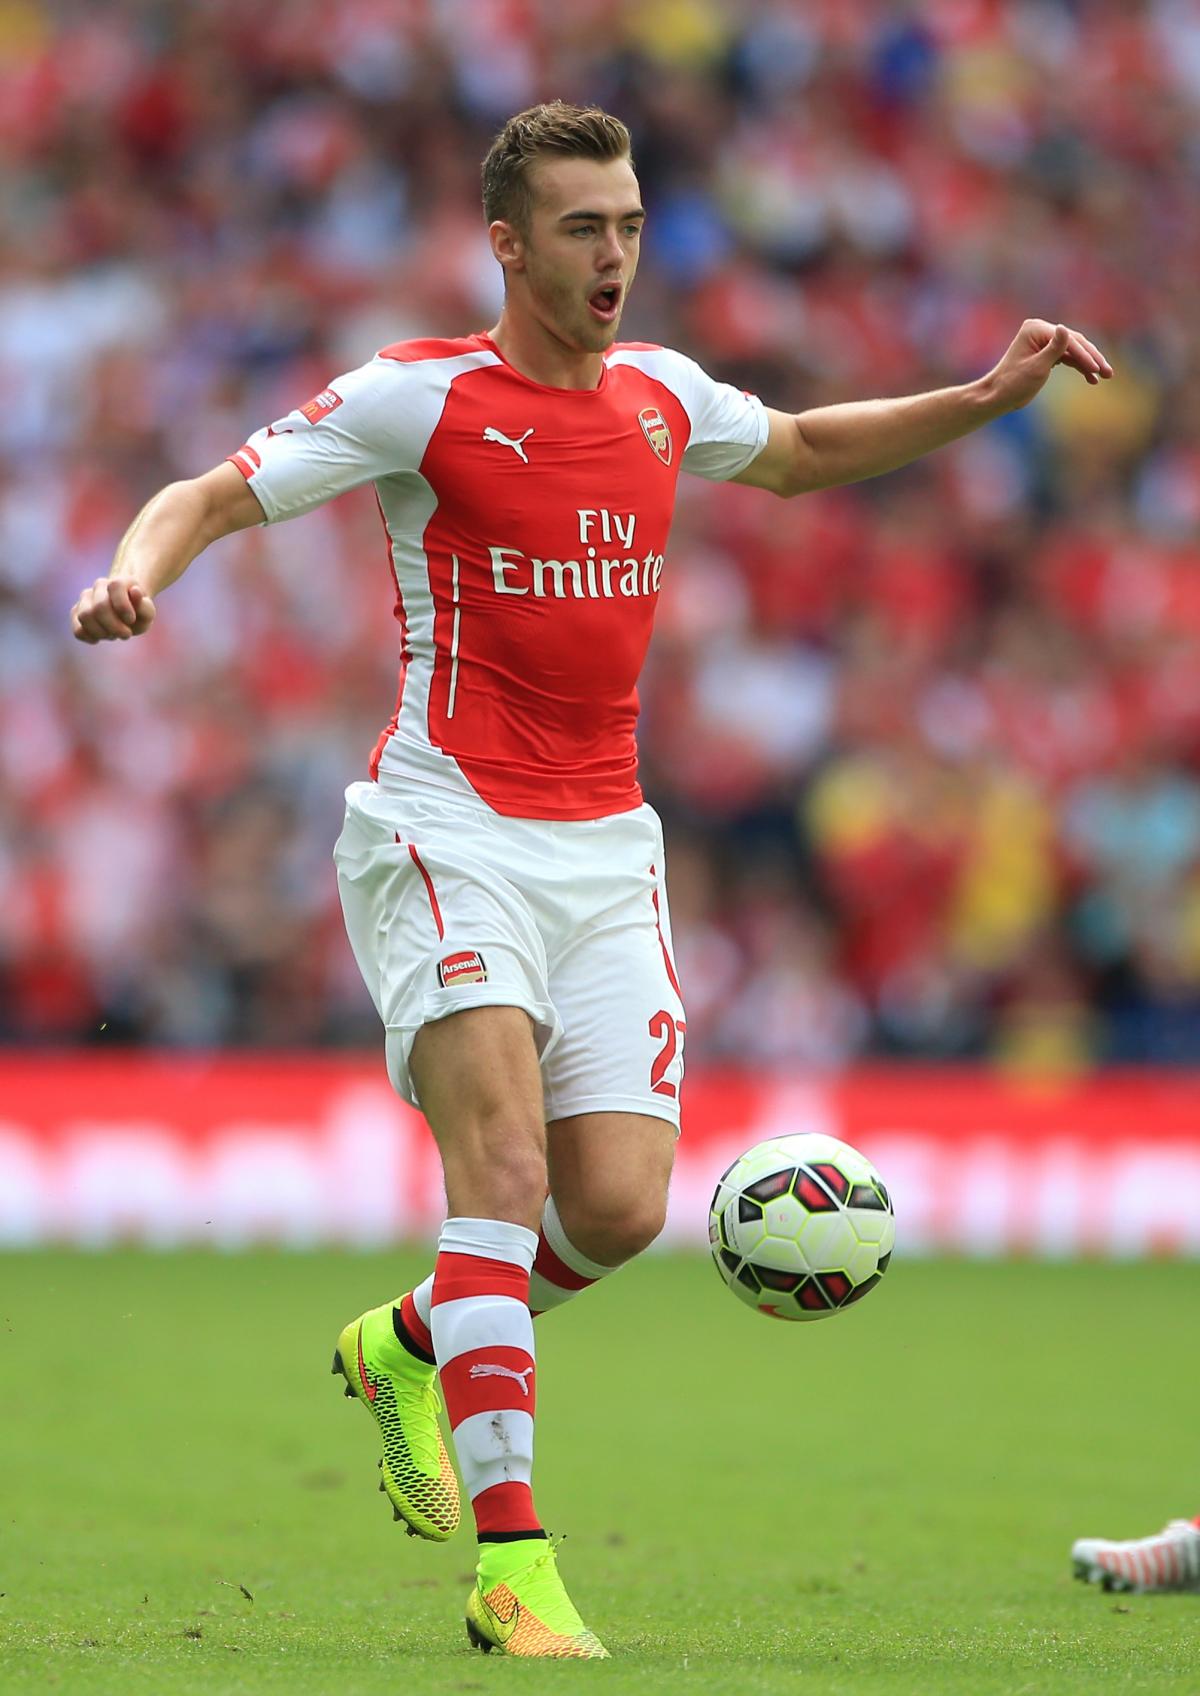 Another former Saint at Arsenal, Calum Chambers